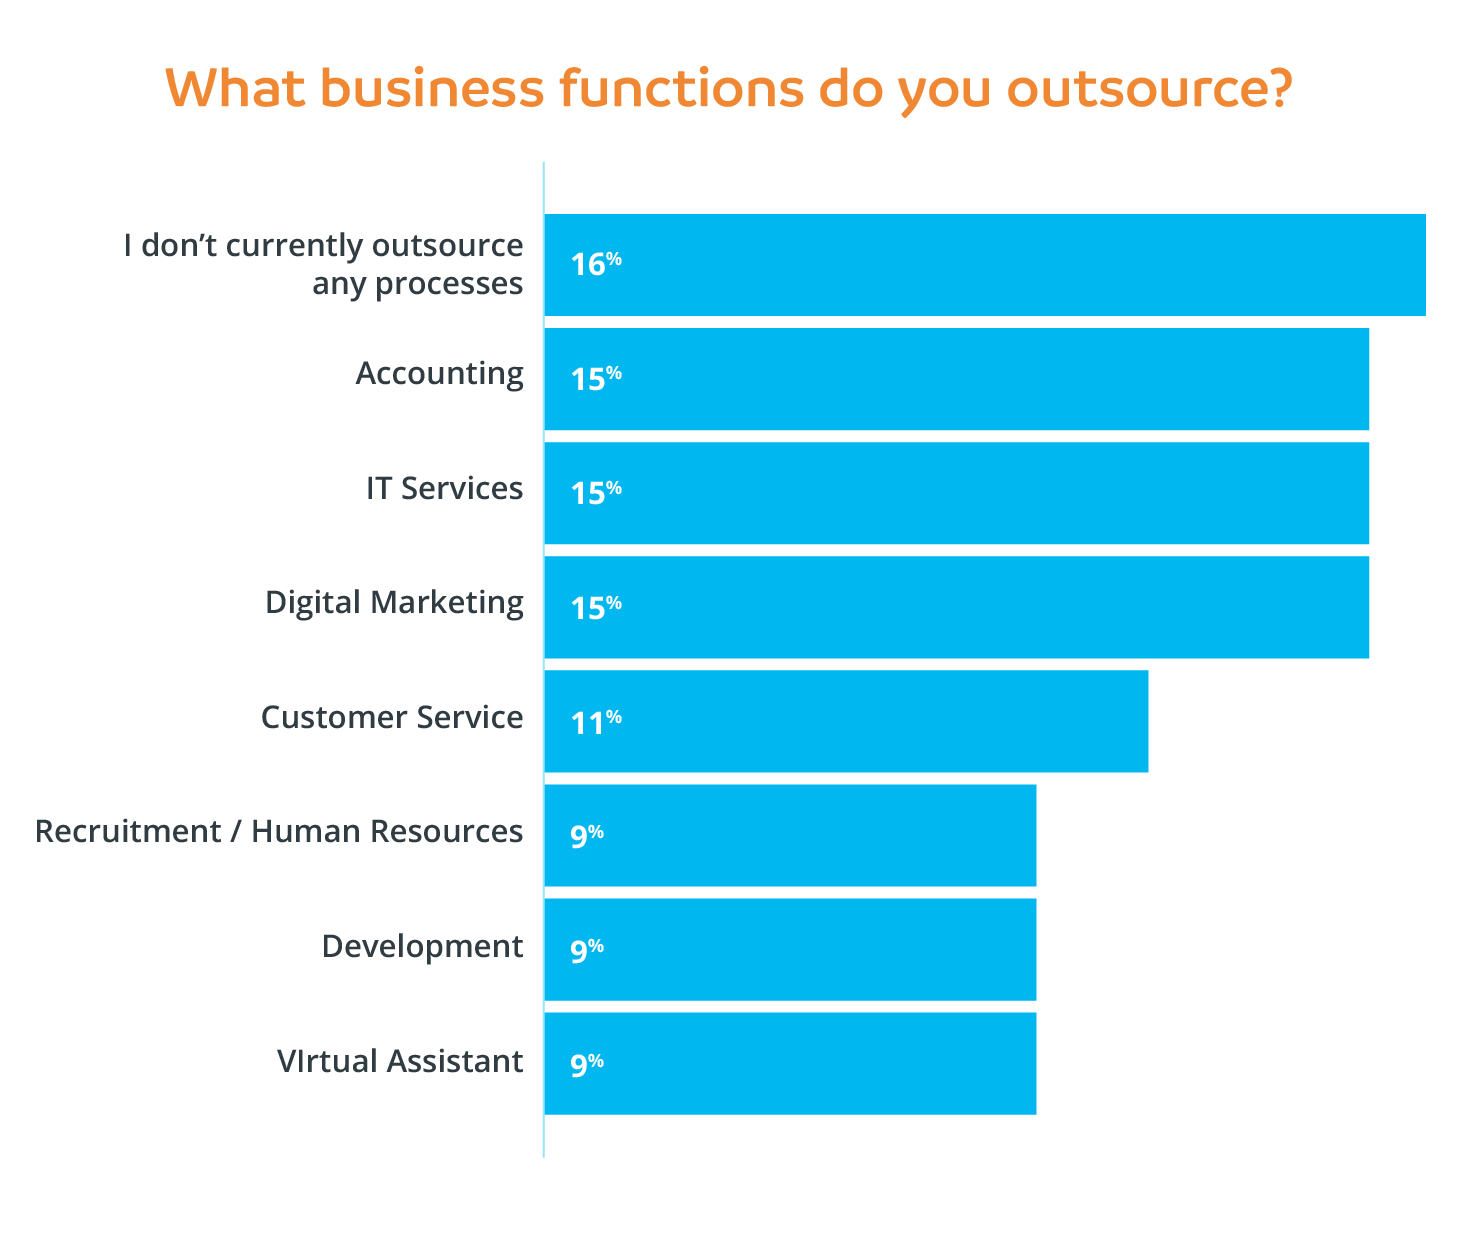 What business functions do you outsource